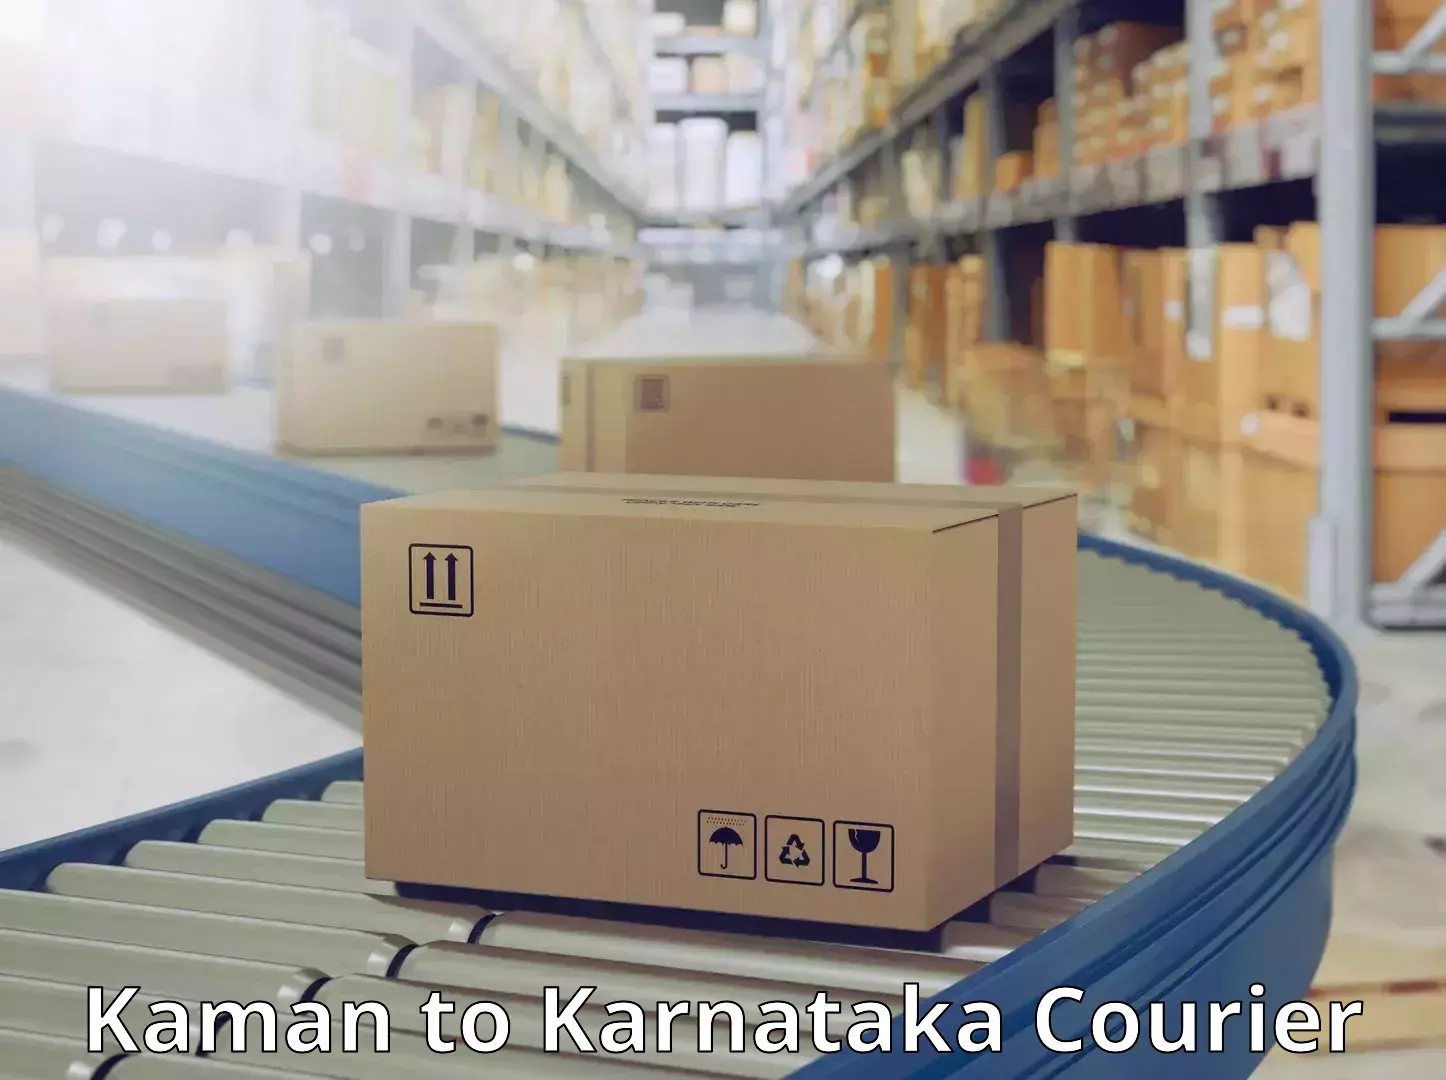 Cost-effective courier solutions Kaman to Bengaluru